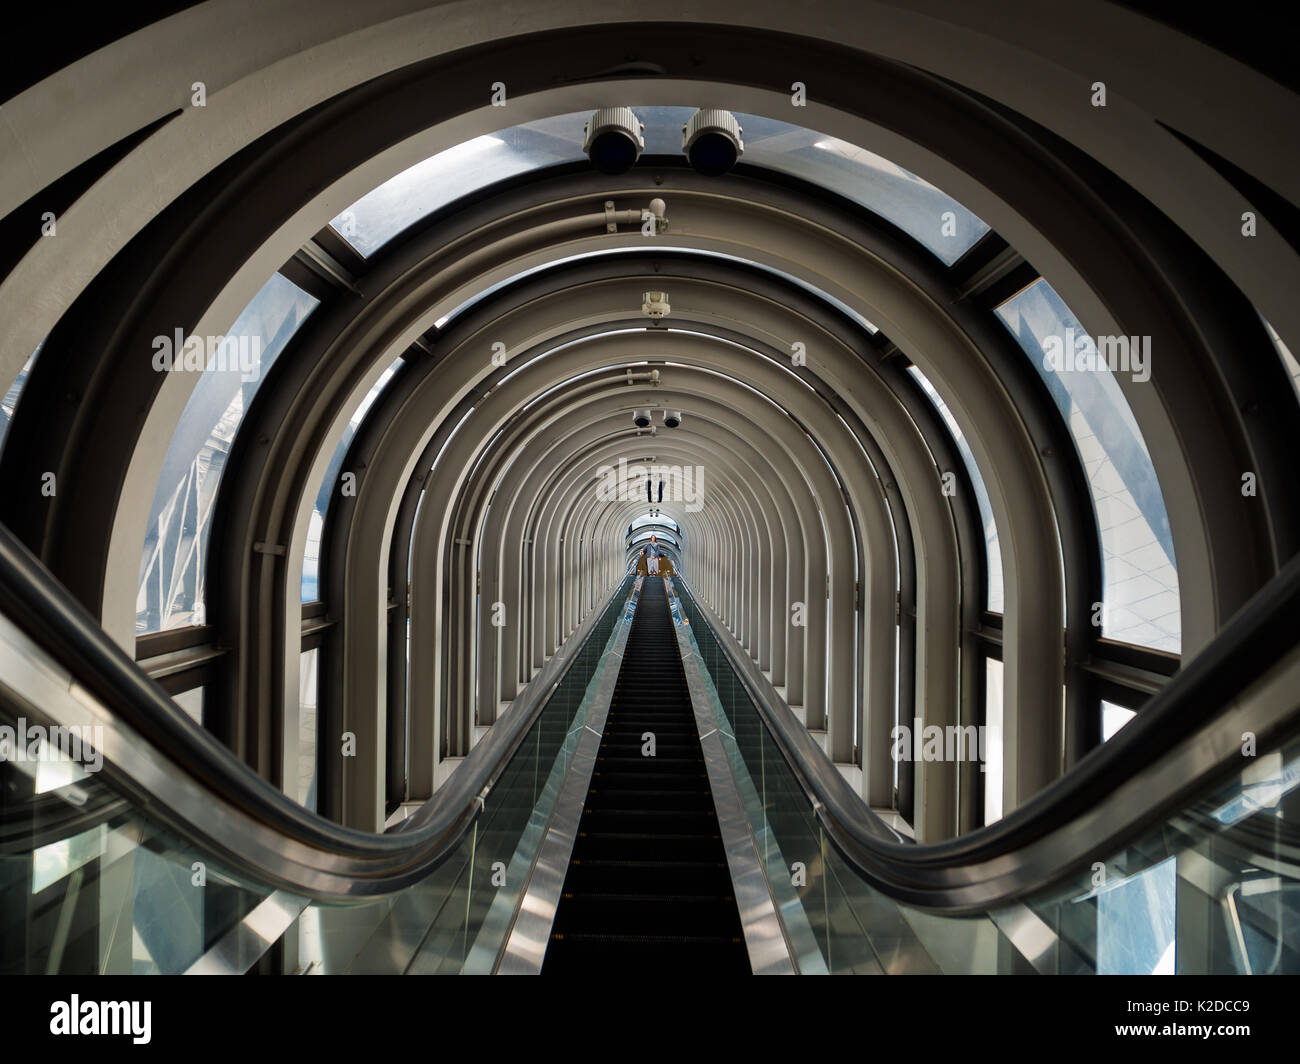 KYOTO, JAPAN - JULY 05, 2017: View of the spectacular escalator in Umeda Sky Building, a modern high rise skyscraper in the Kita district of Osaka Stock Photo